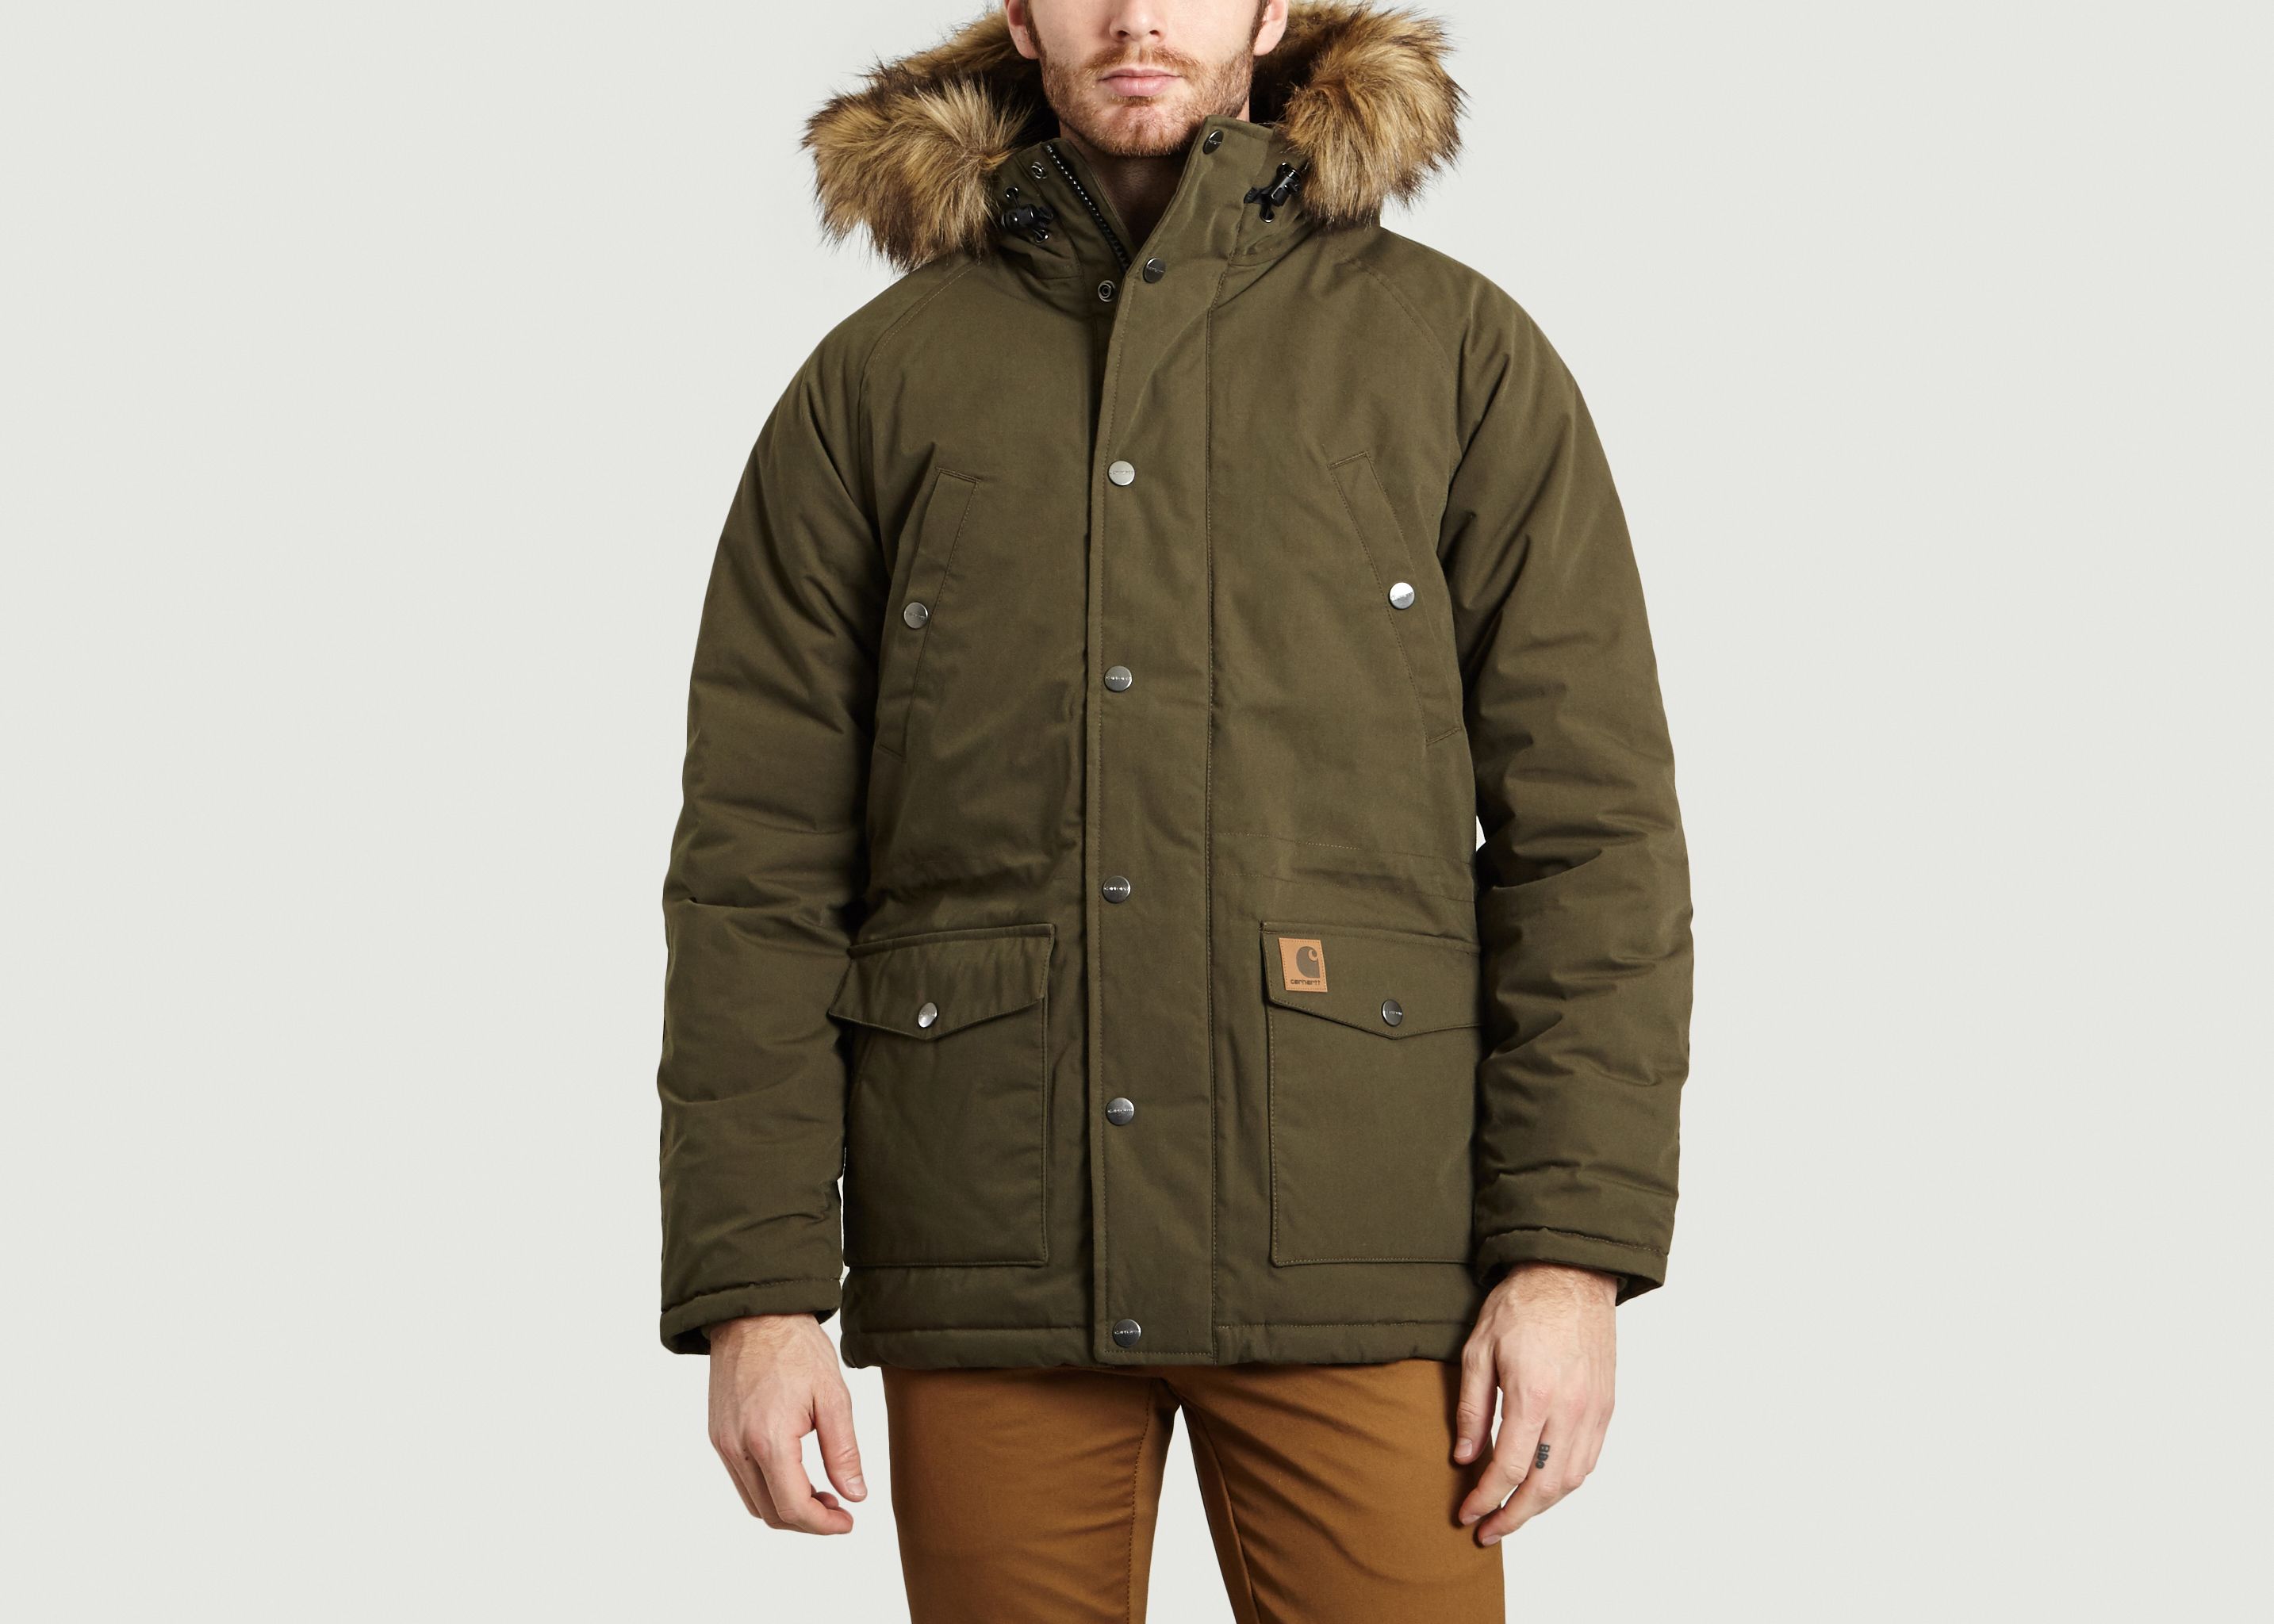 rely Fighter Roman Trapper Parka Khaki Carhartt WIP | L'Exception